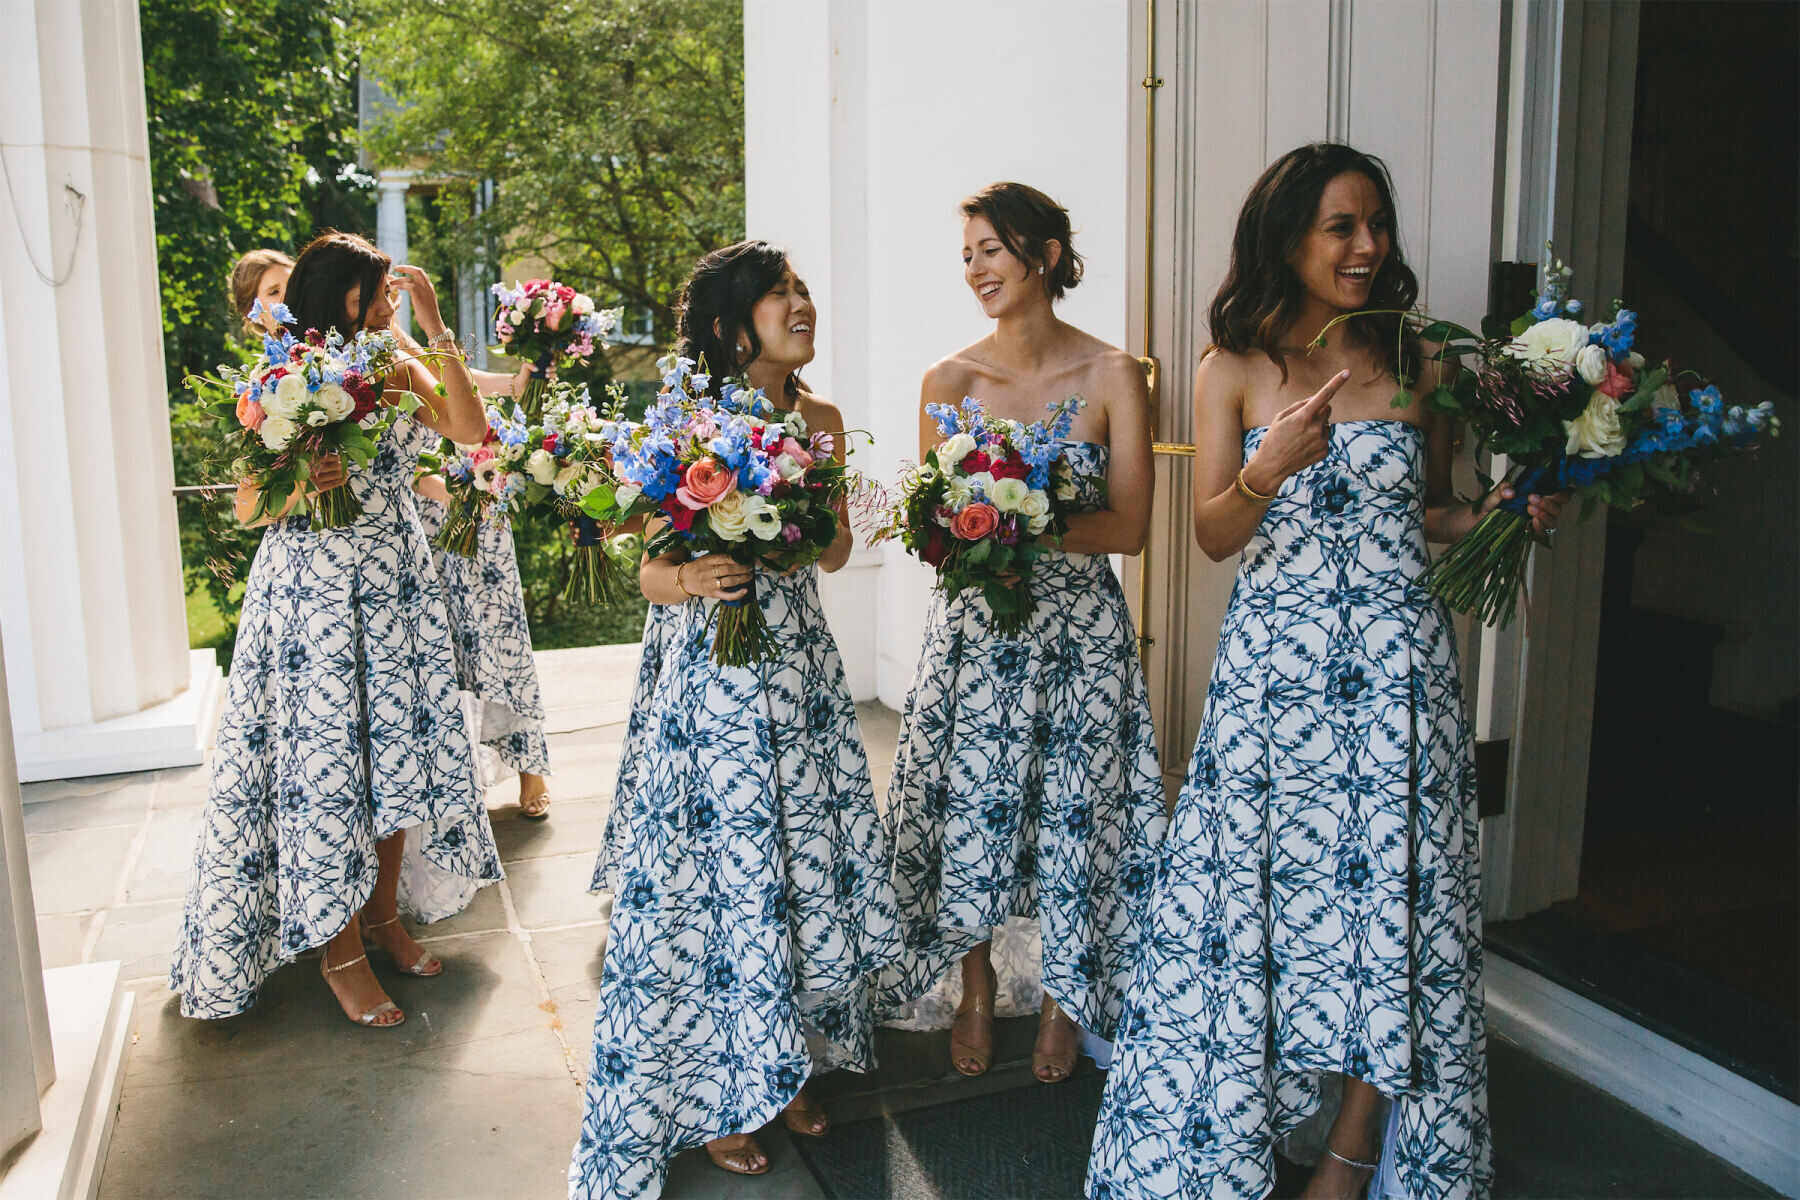 Wedding Traditions: Bridesmaids in blue and white patterned dresses.